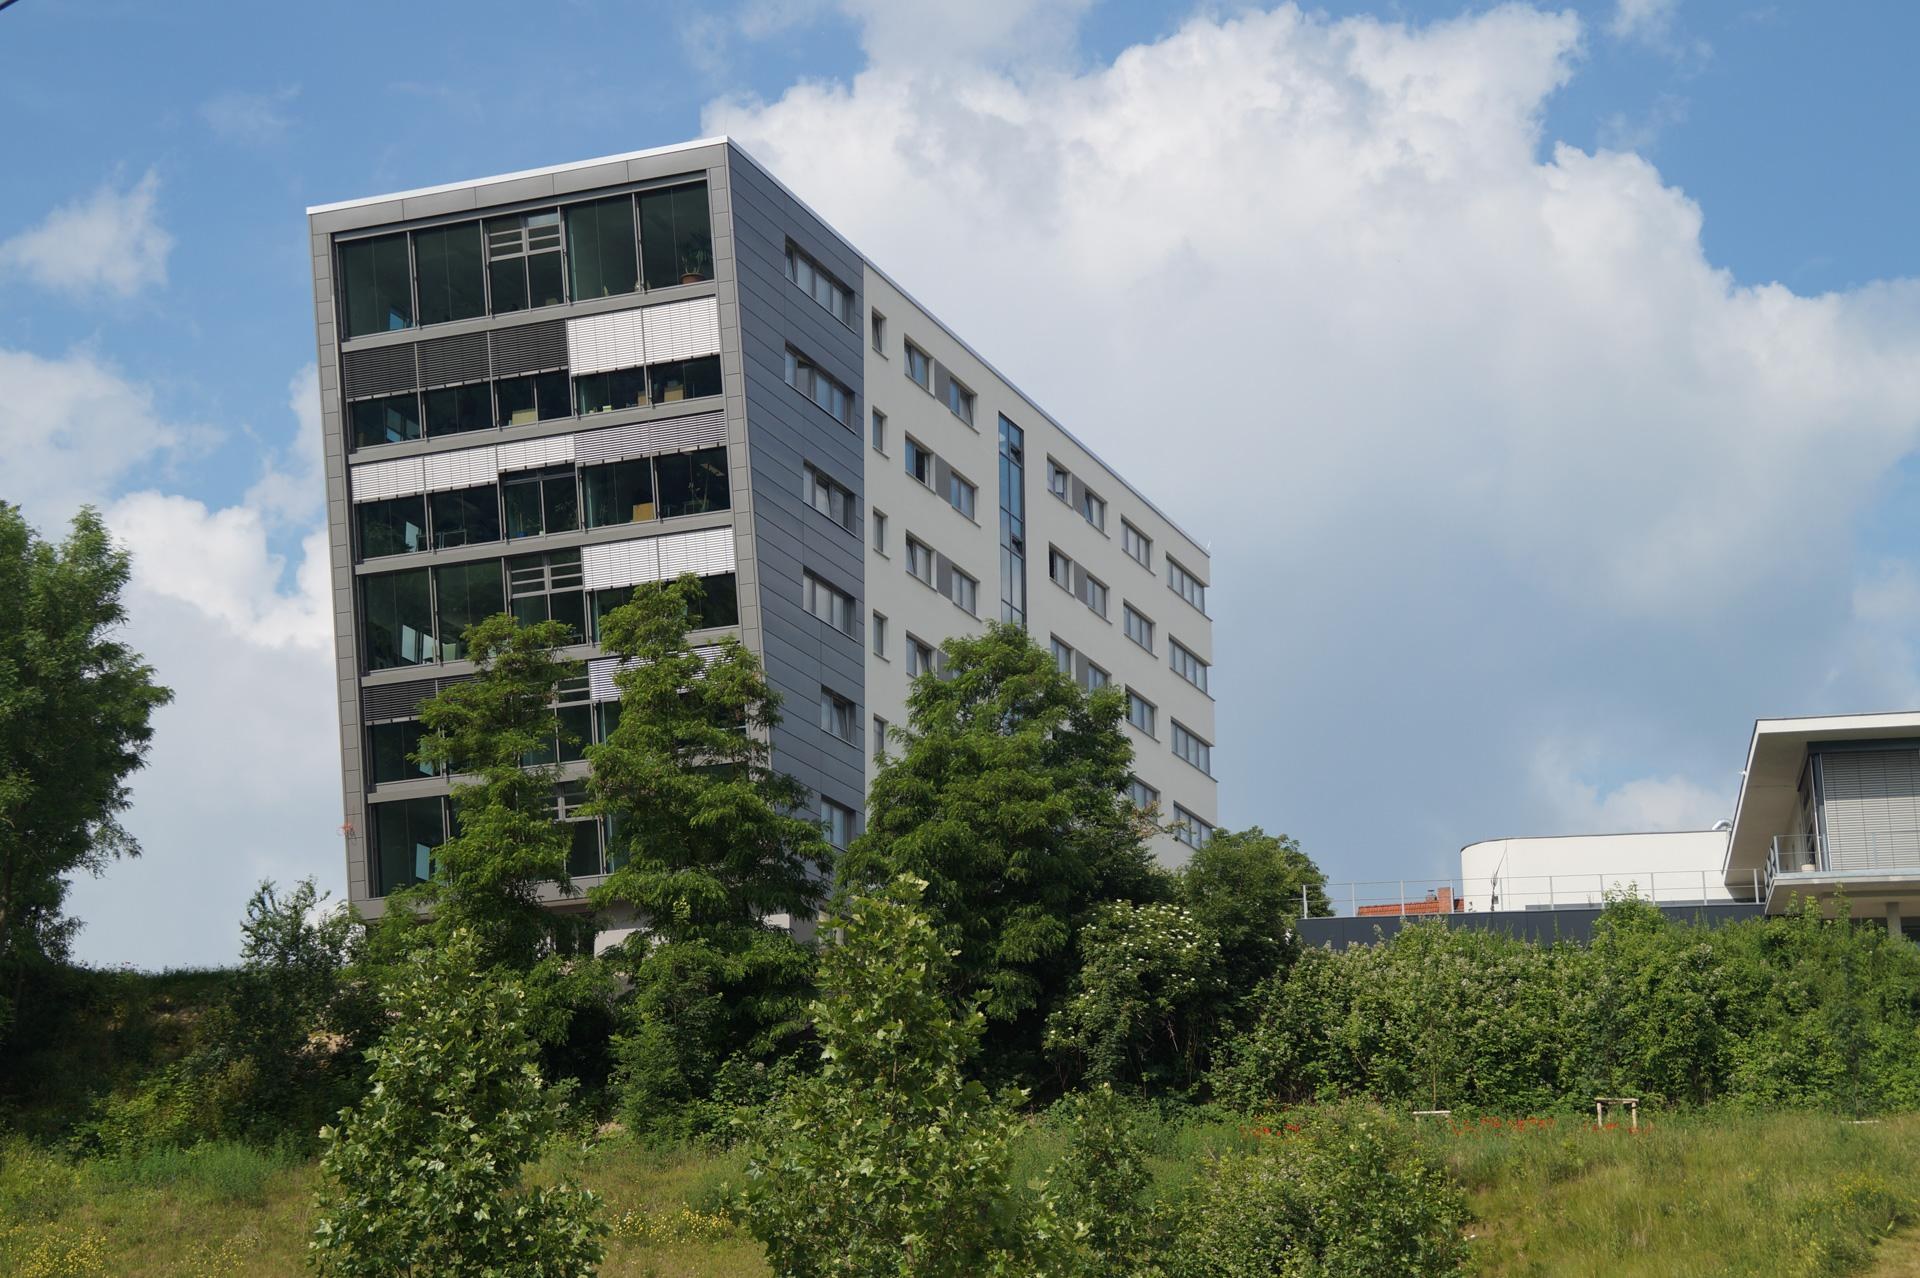 Building of the Institute of Data Science in Jena